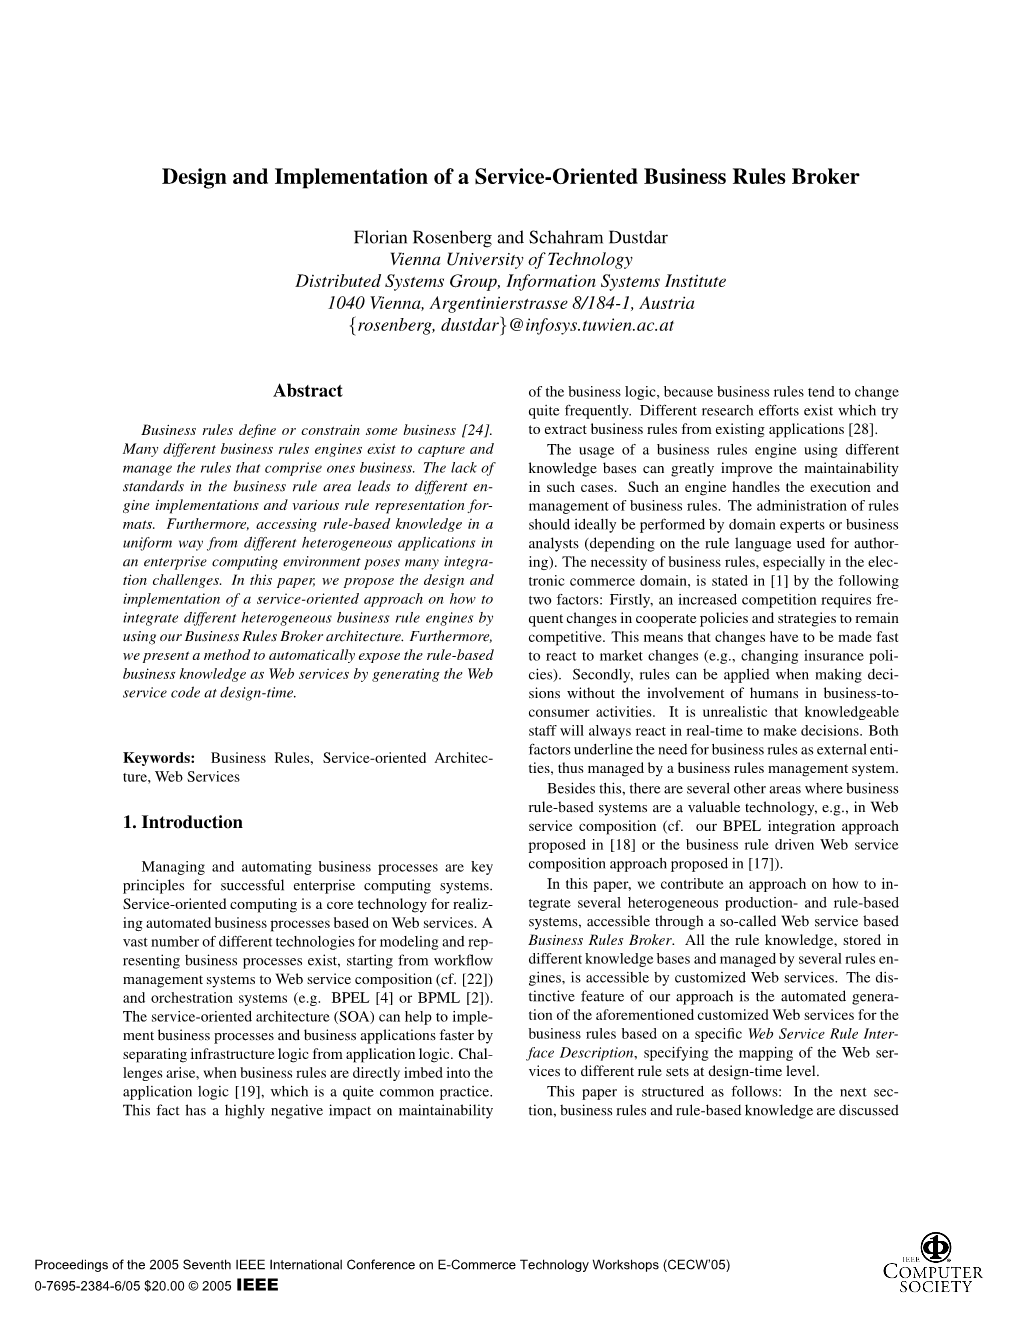 Design and Implementation of a Service-Oriented Business Rules Broker